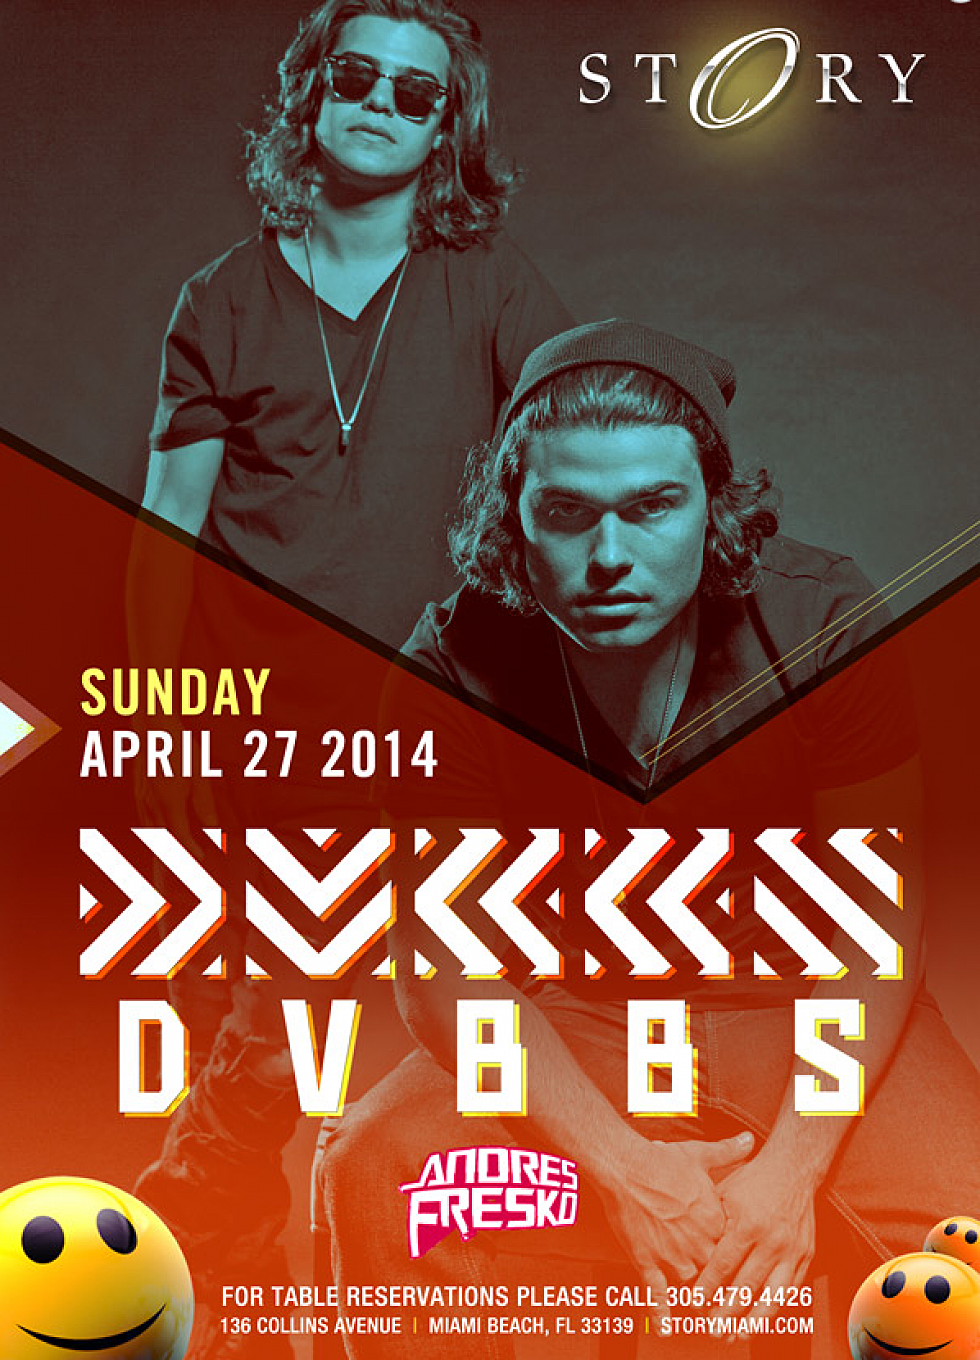 Contest: Win tickets to DVBBS @ Story, Miami this Saturday, 4/27!